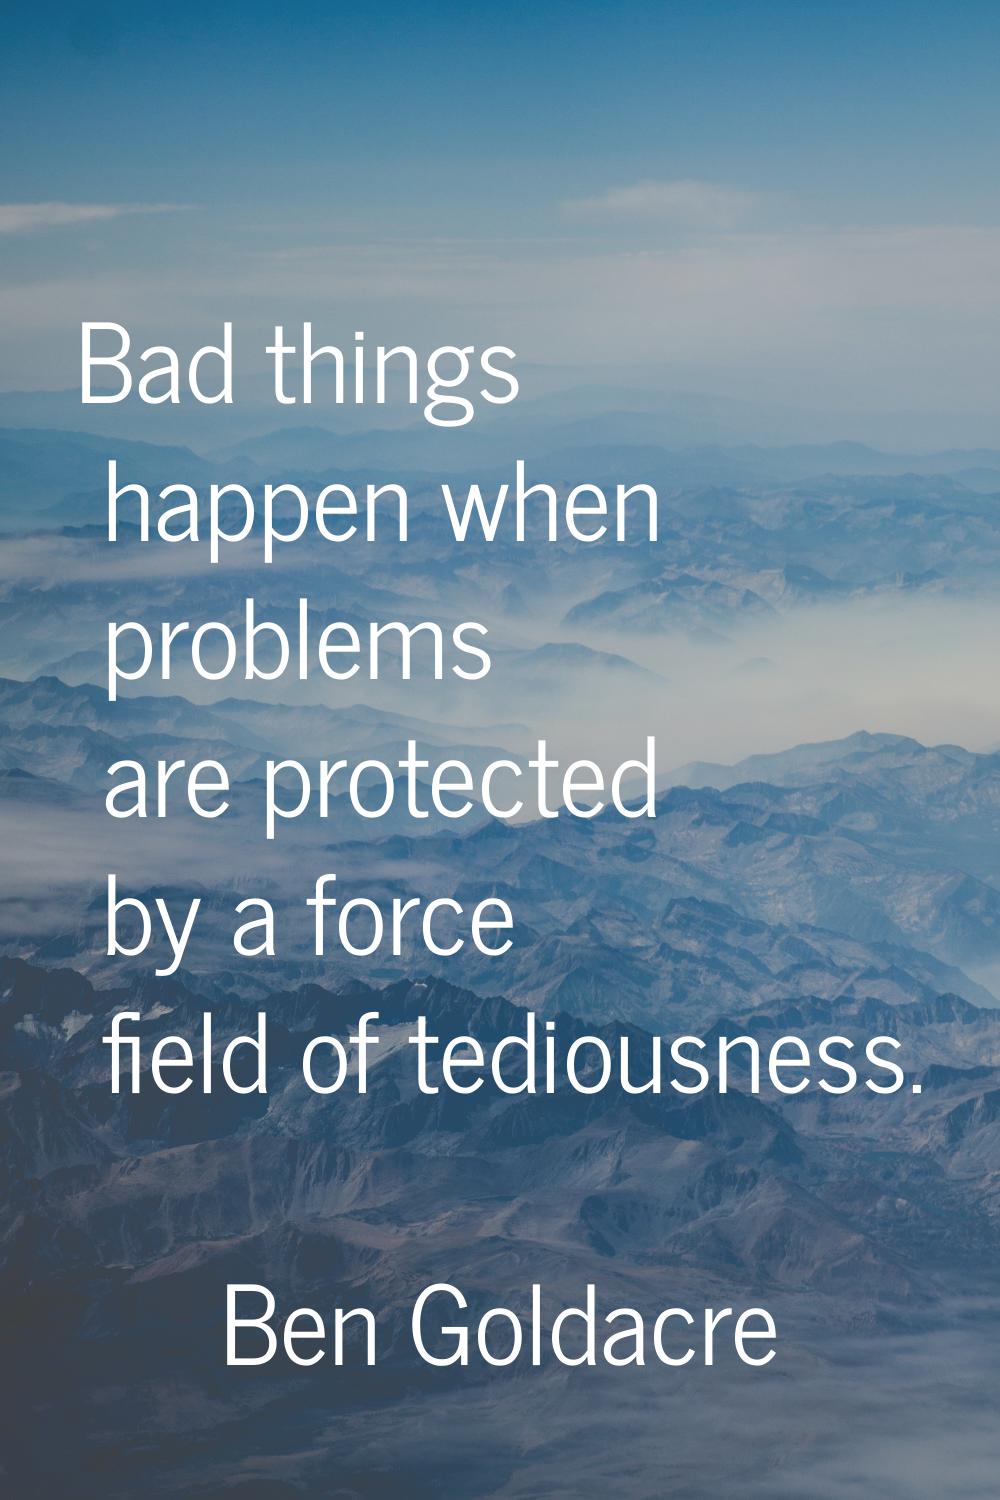 Bad things happen when problems are protected by a force field of tediousness.